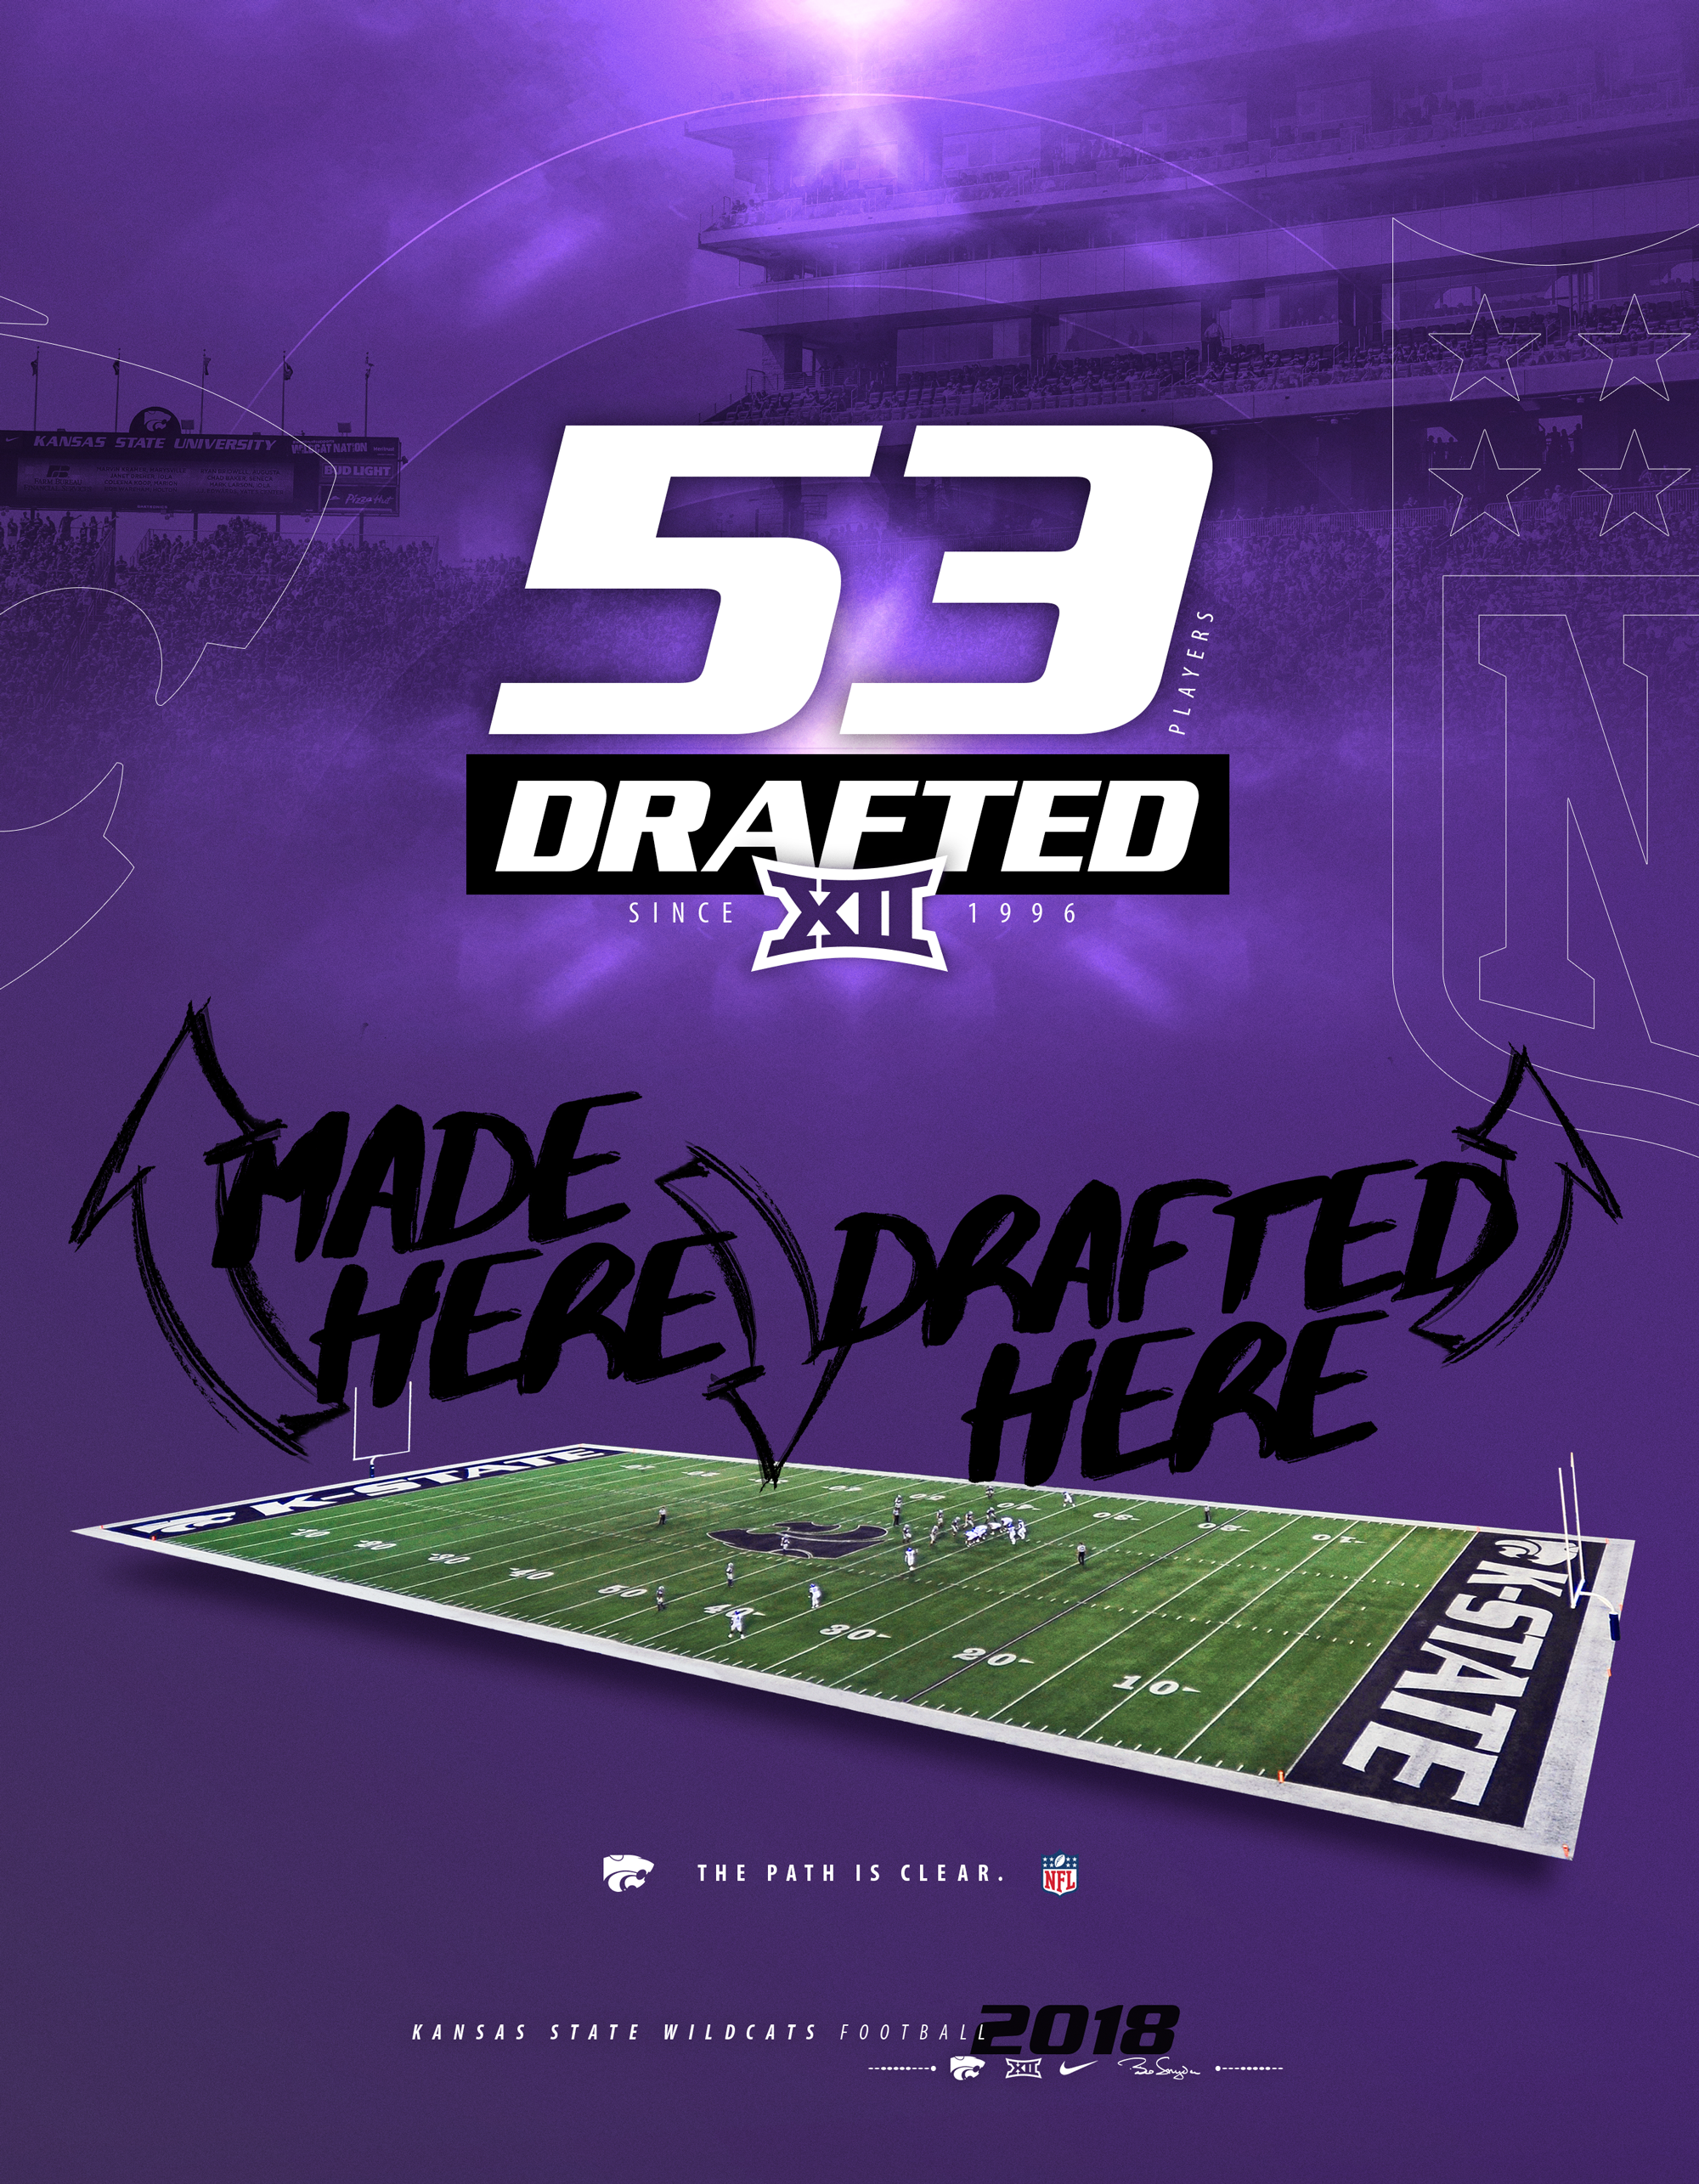 53-NFL-Drafted-Since-1996-v2.png